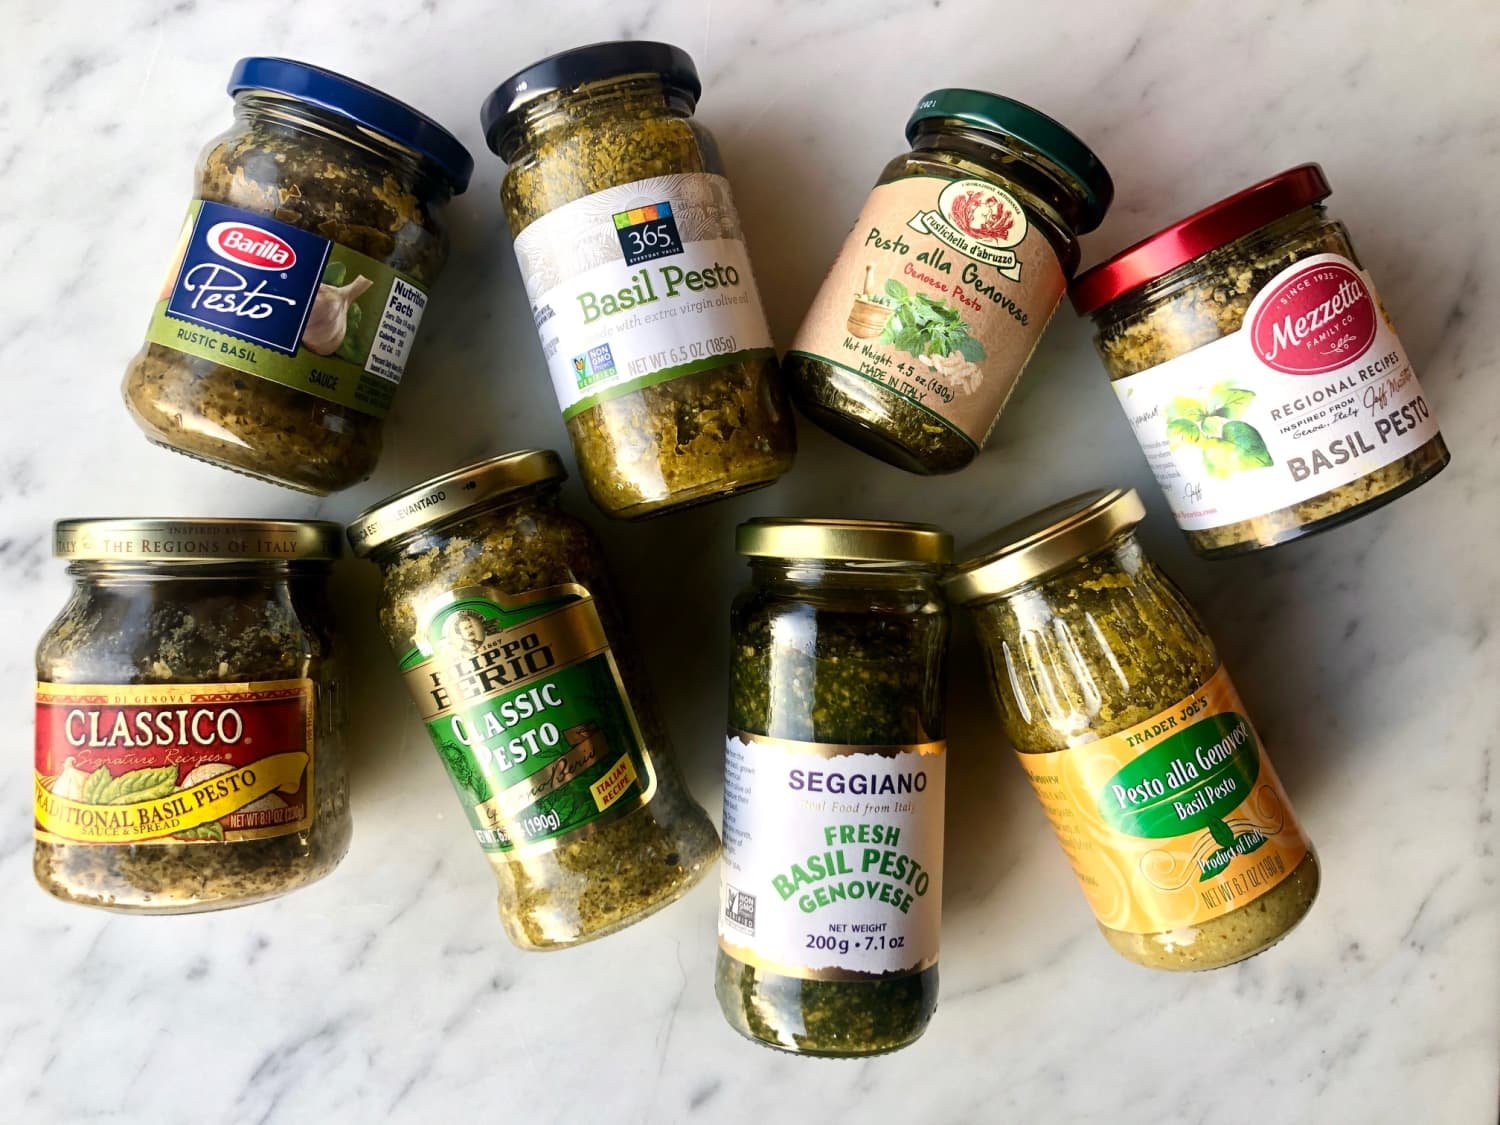 I Tried 8 Jars of Pesto and Now These Are the Only 2 I’ll Buy